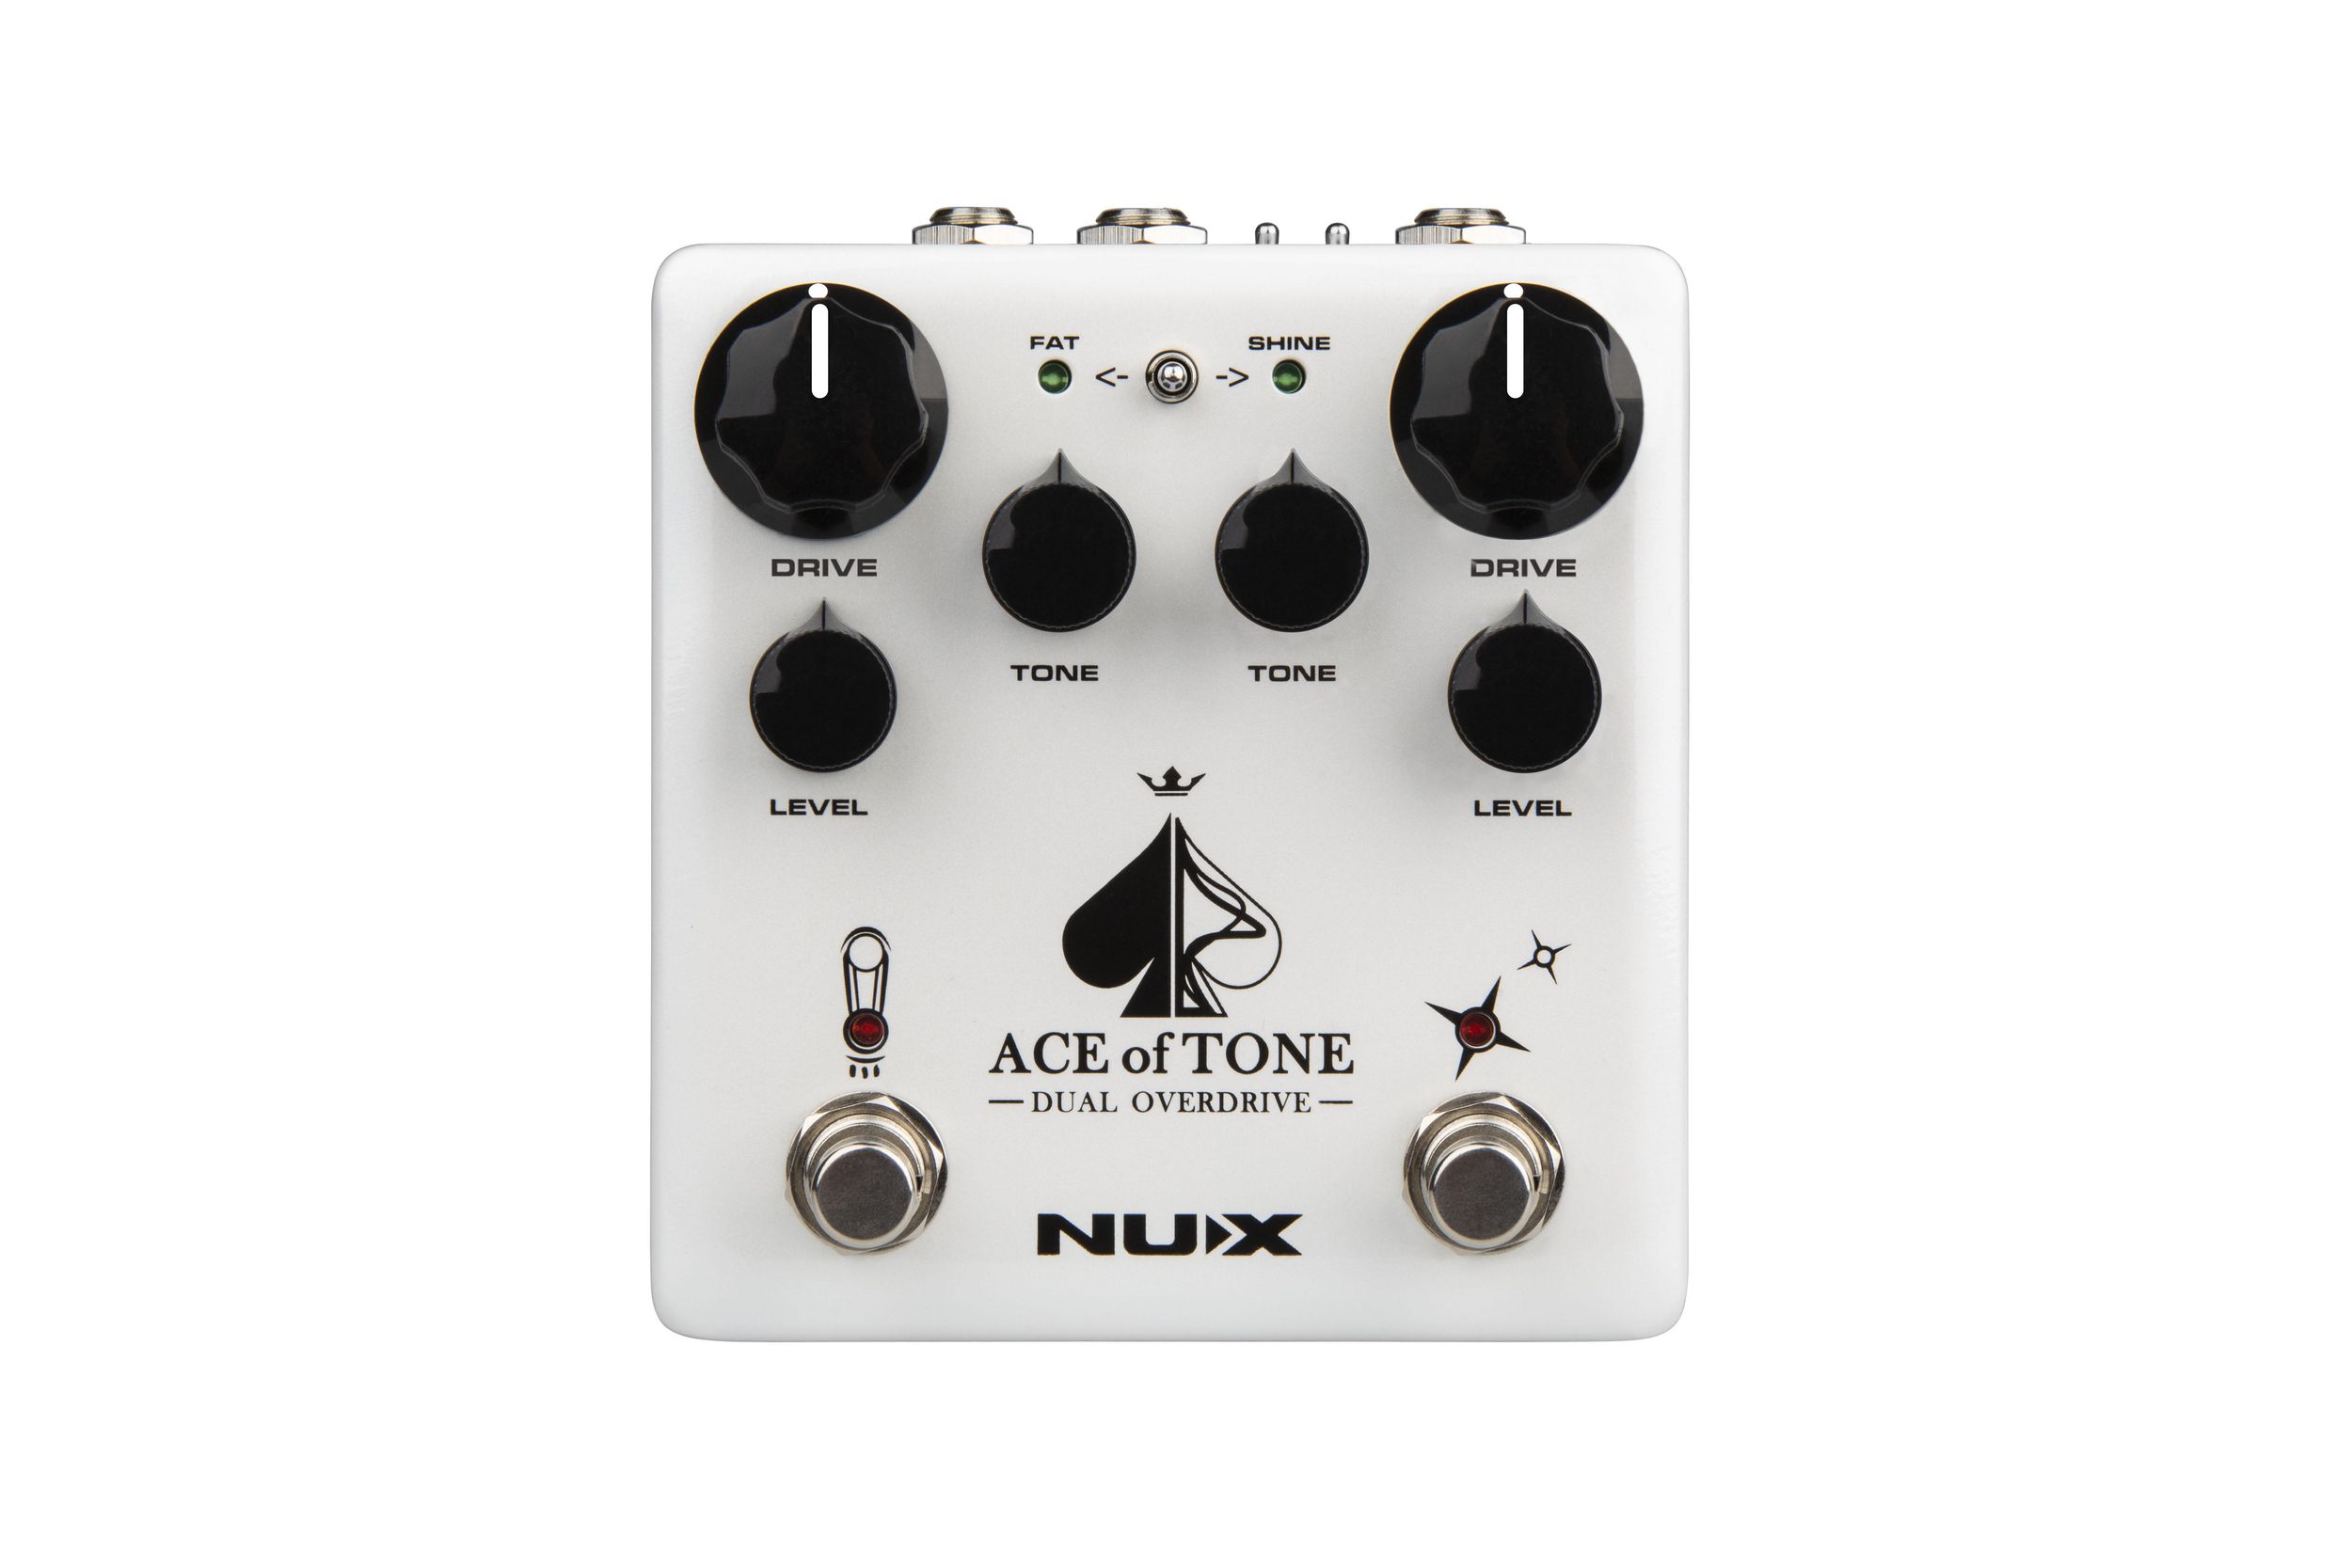 Nu-X Introduces the Ace of Tone Dual Overdrive